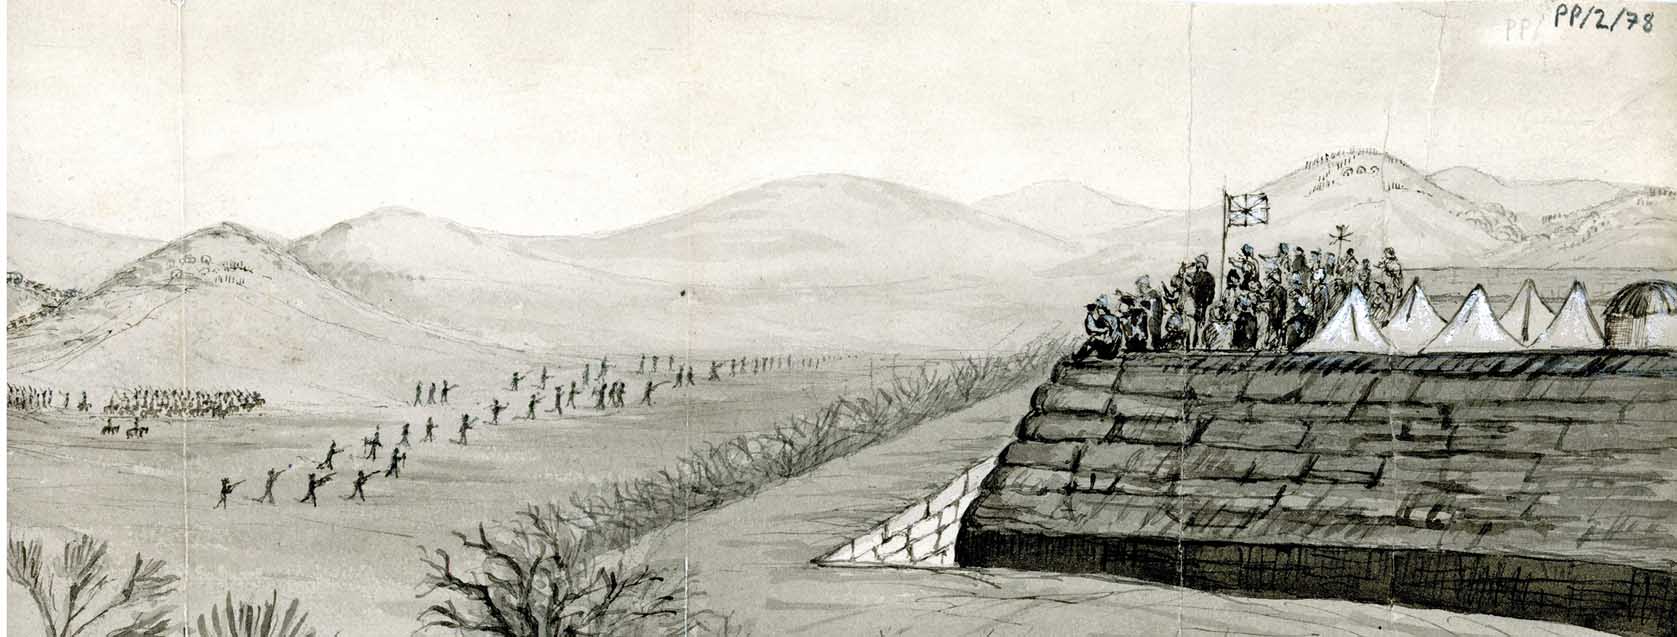 Capt. Wardell’s sketch of Fort Warwick, which he and his company built and successfully defended against Xhosa attacks for several months during the Ninth Cape Frontier War (1877–8). (Maynooth University Library)